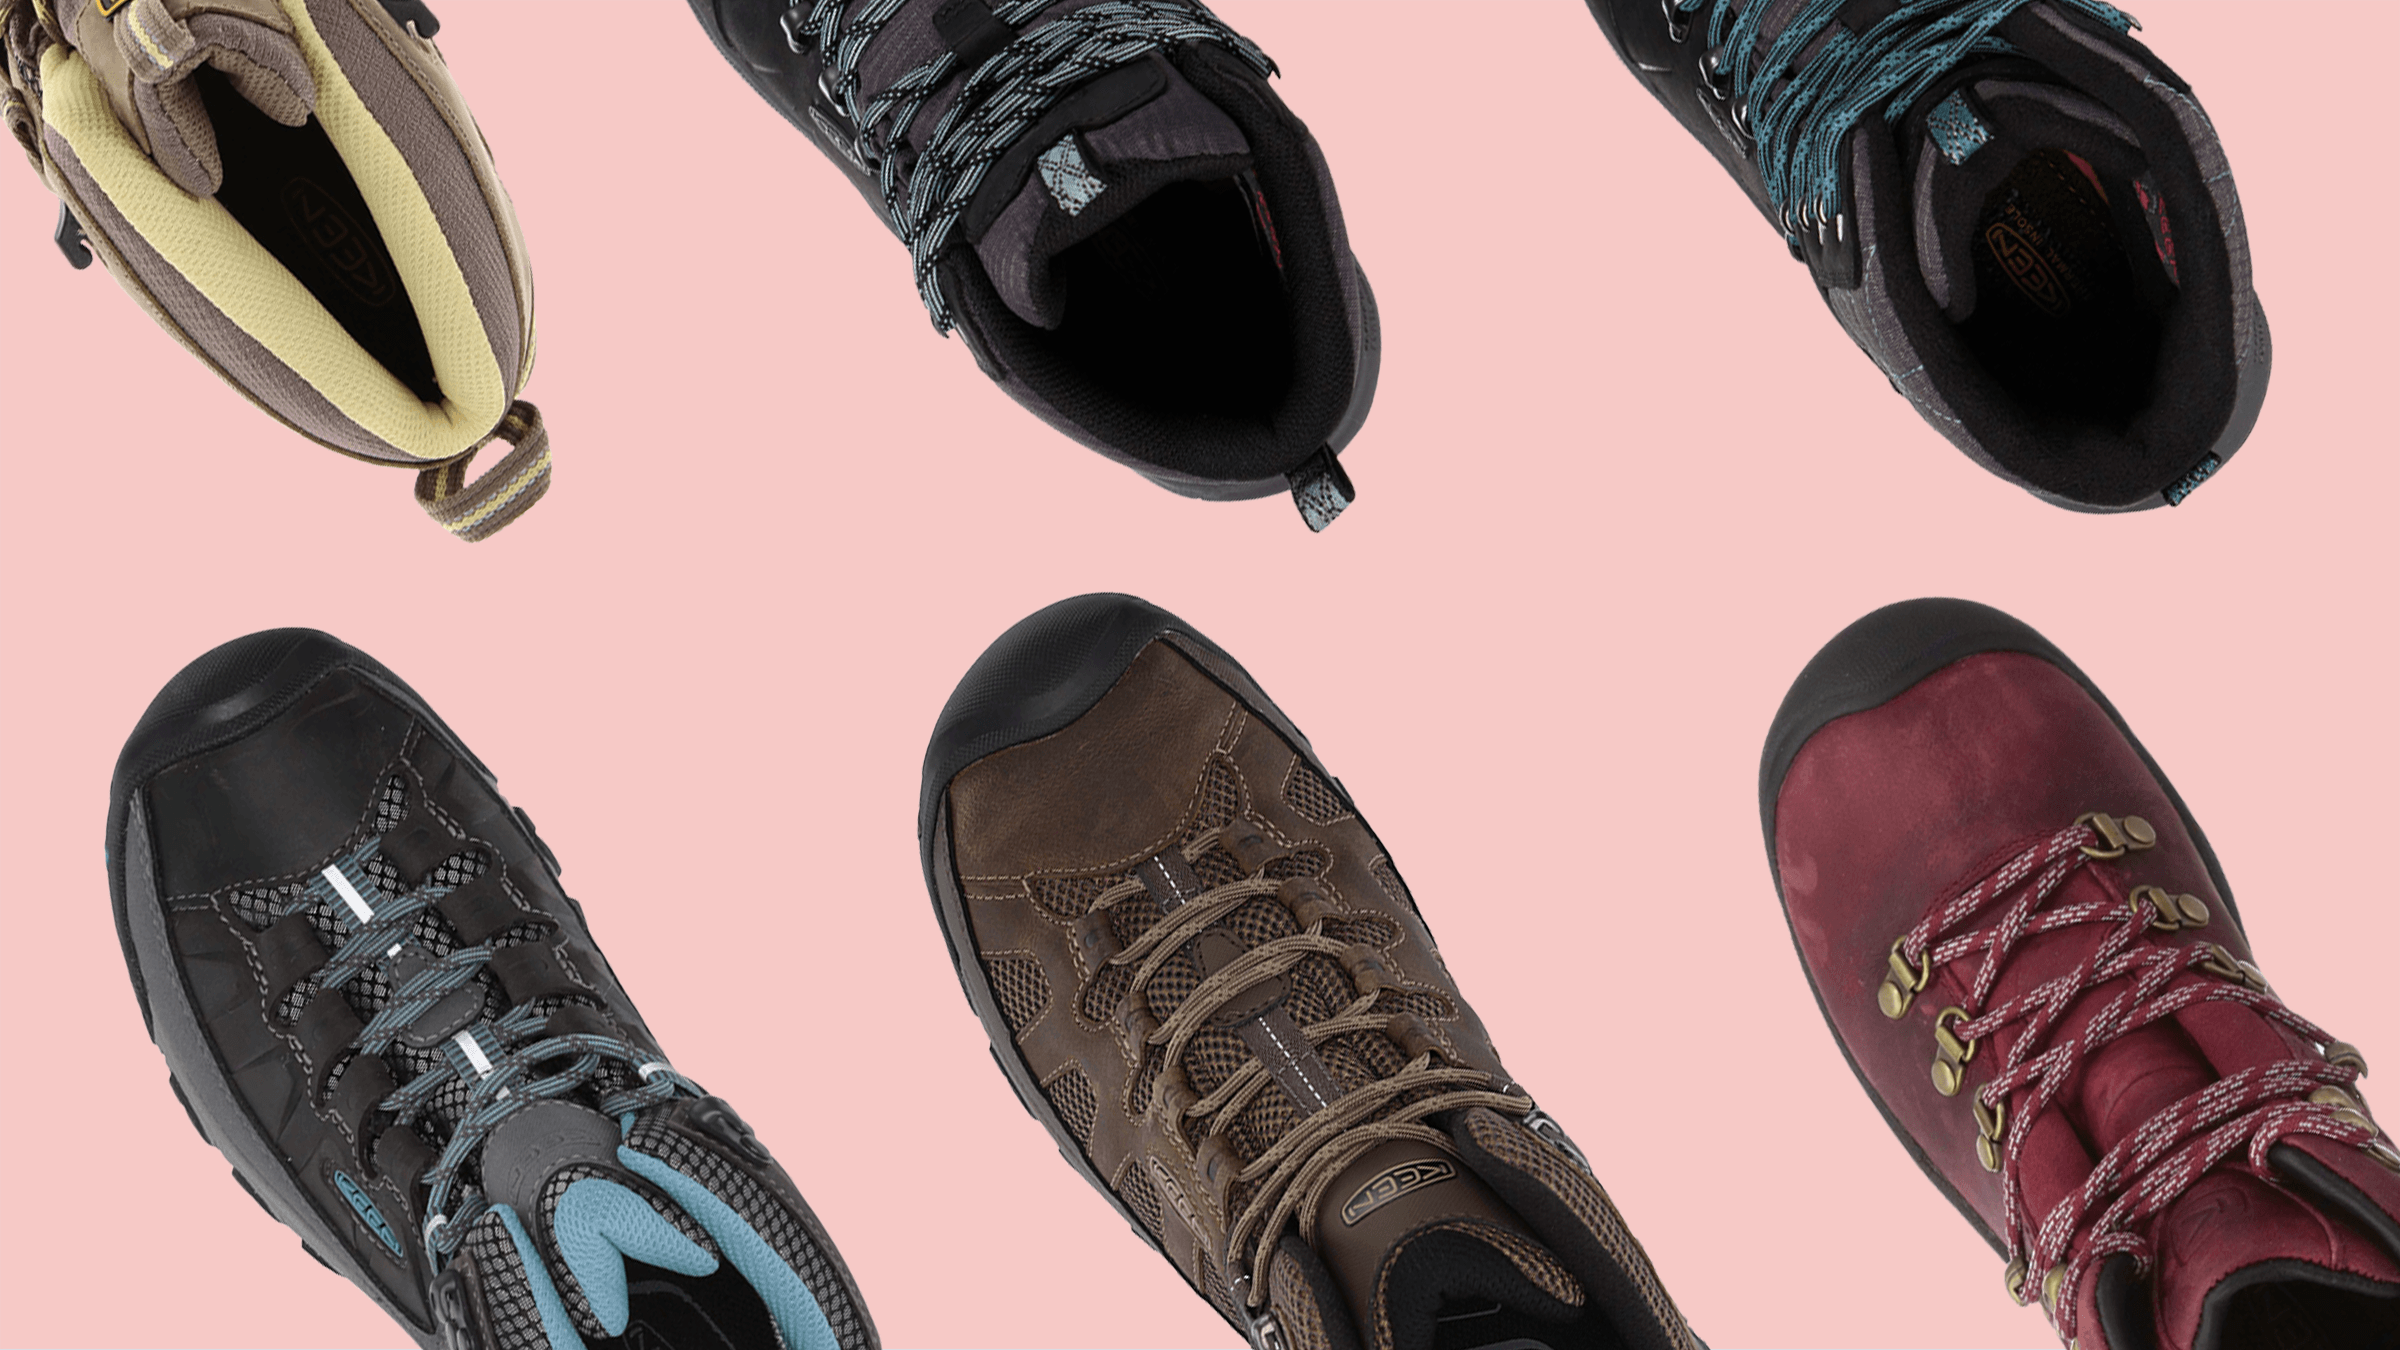 8 Best Keen Hiking Boots For Women in 2022